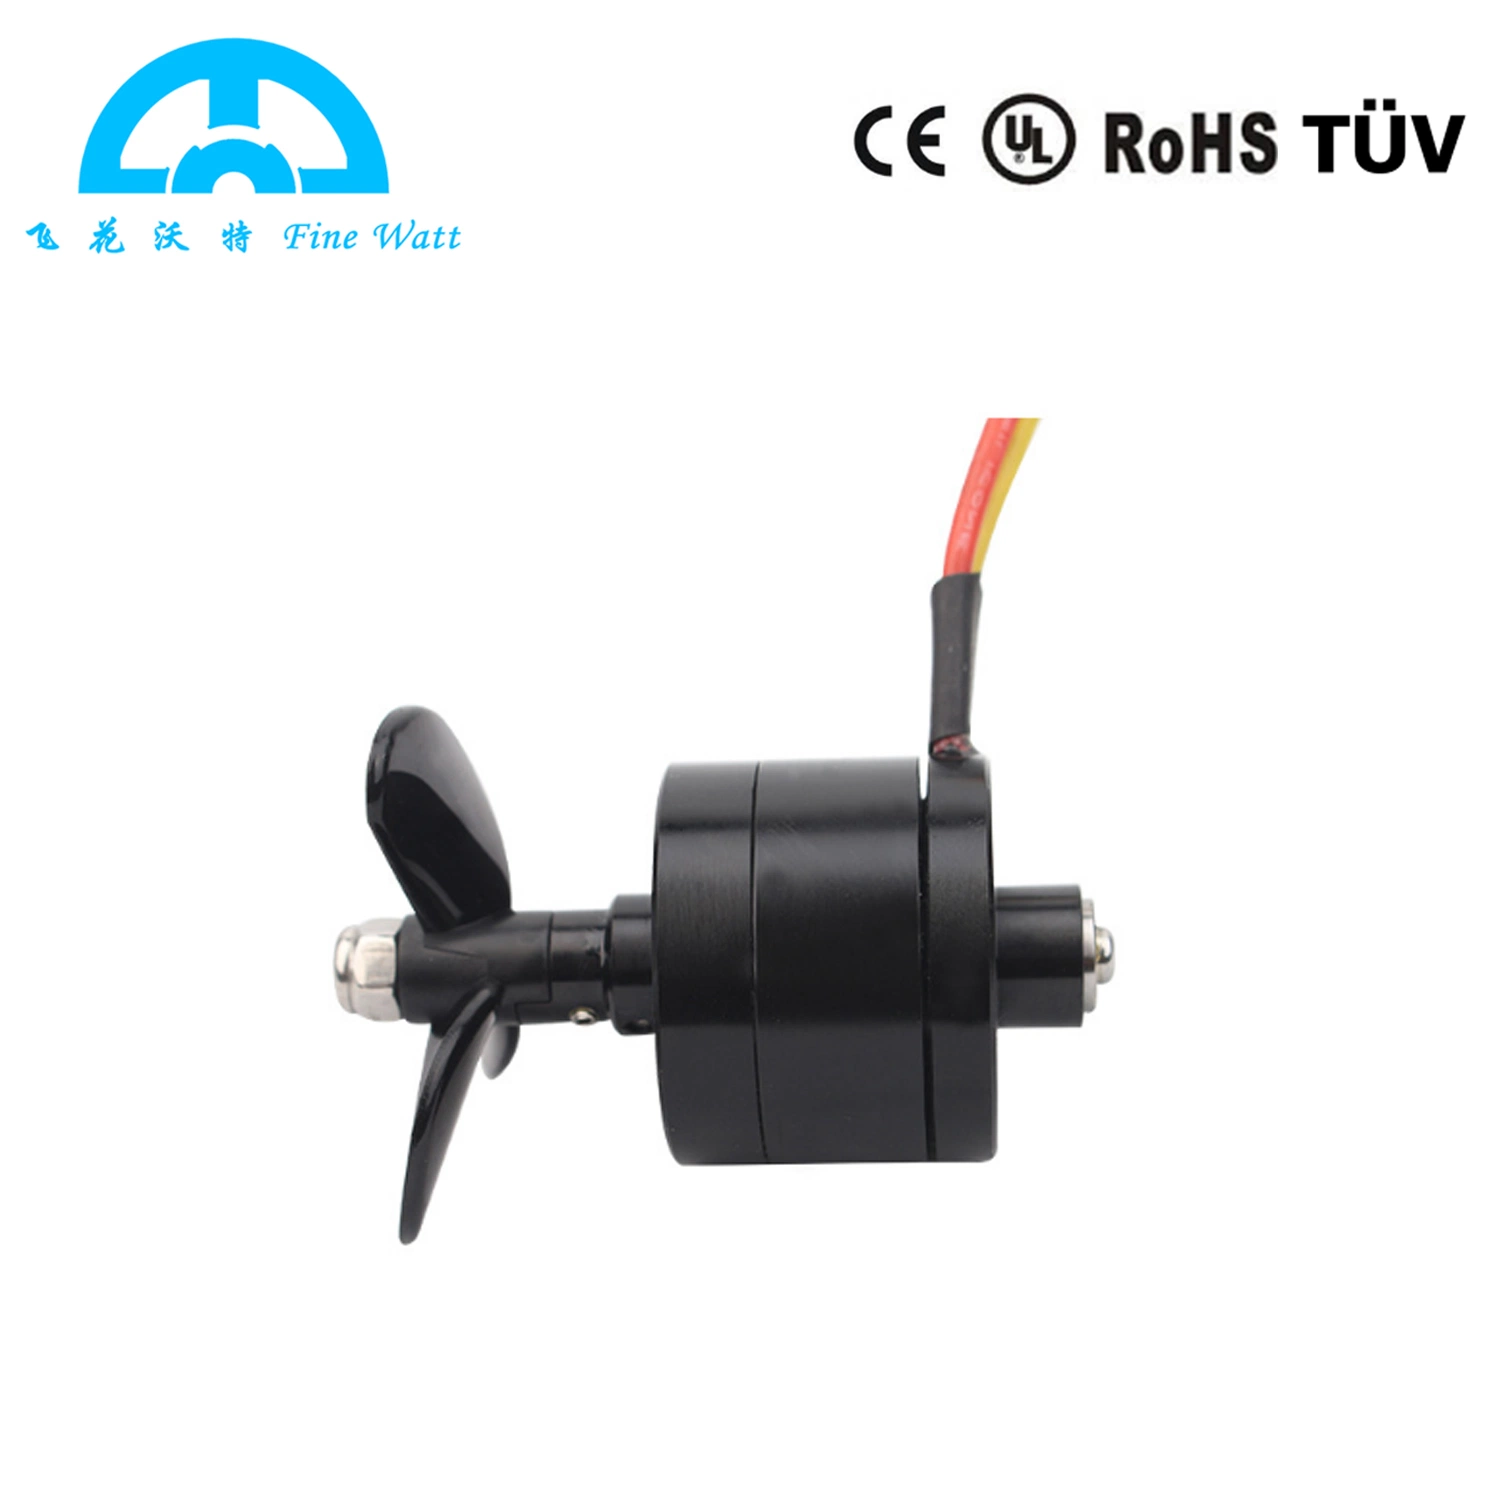 Brushless DC Motor for Deep Water Motor/Remotely Operated Vehicle/Rov Robot/Submersible Motor/Special Potting Motor/Diving Motor